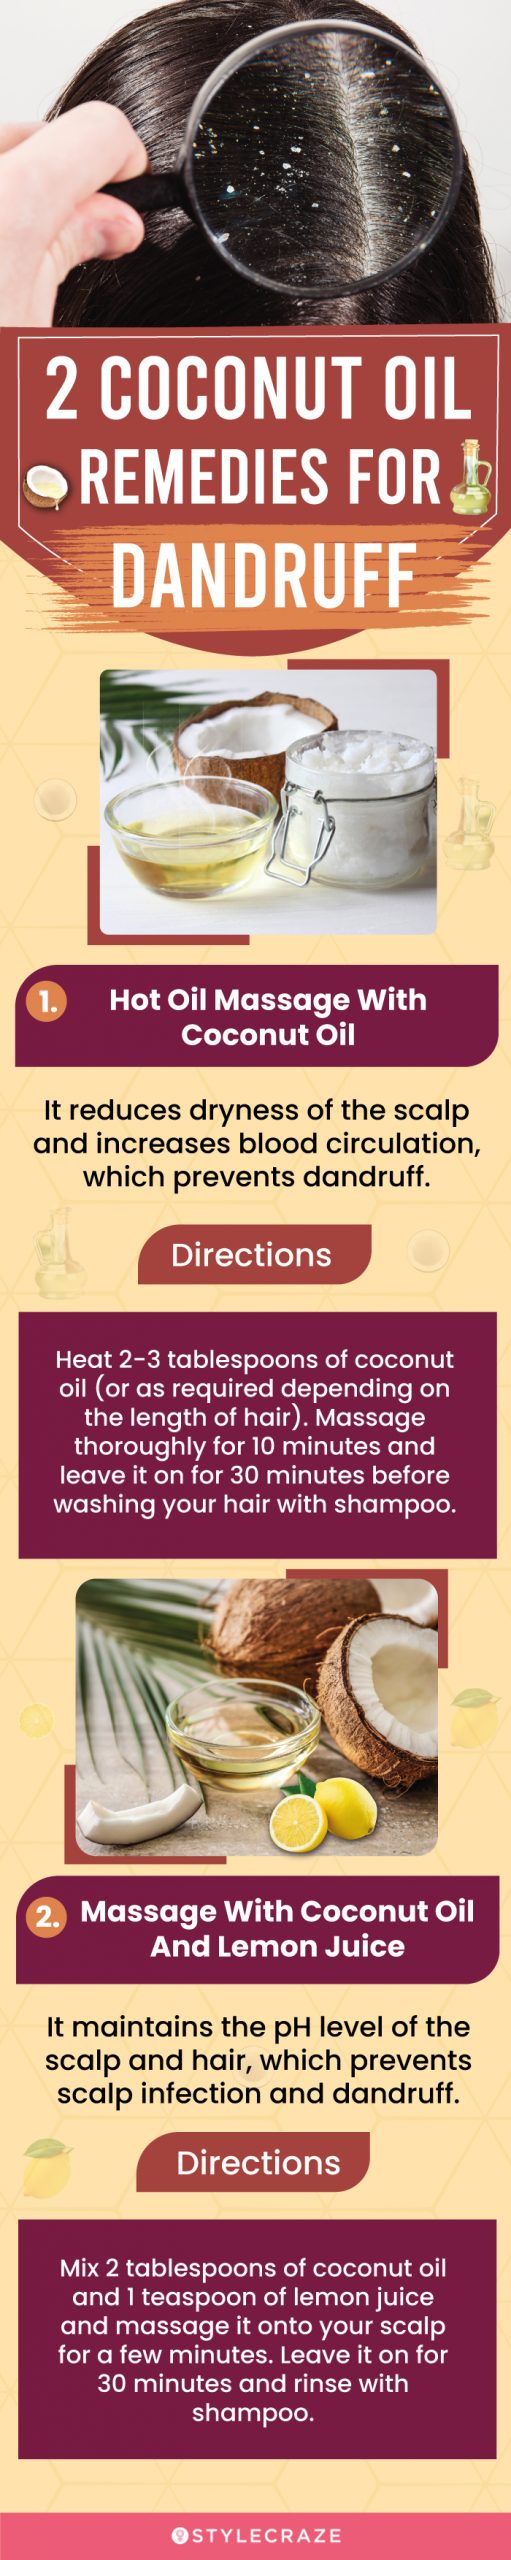 How To Use Coconut For Dandruff